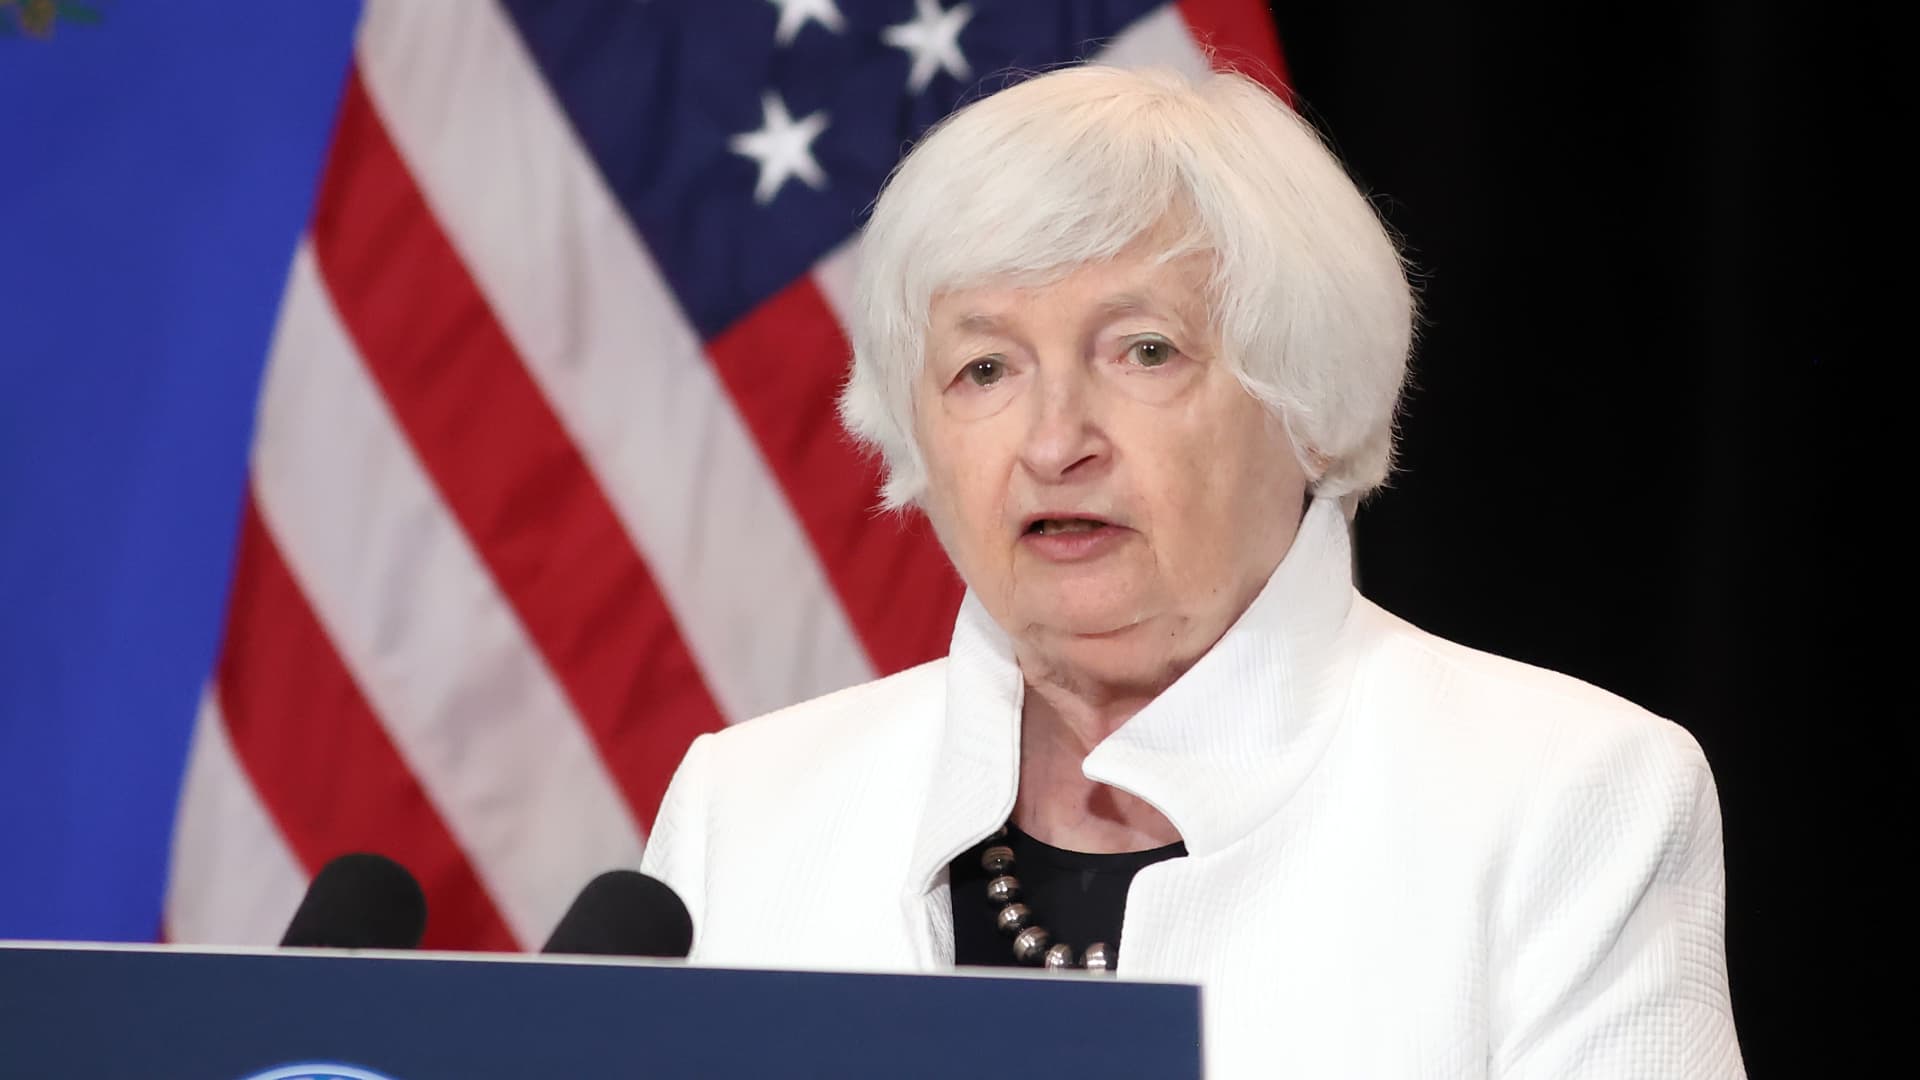 Yellen’s UN week agenda: Food prices, climate change and global aid